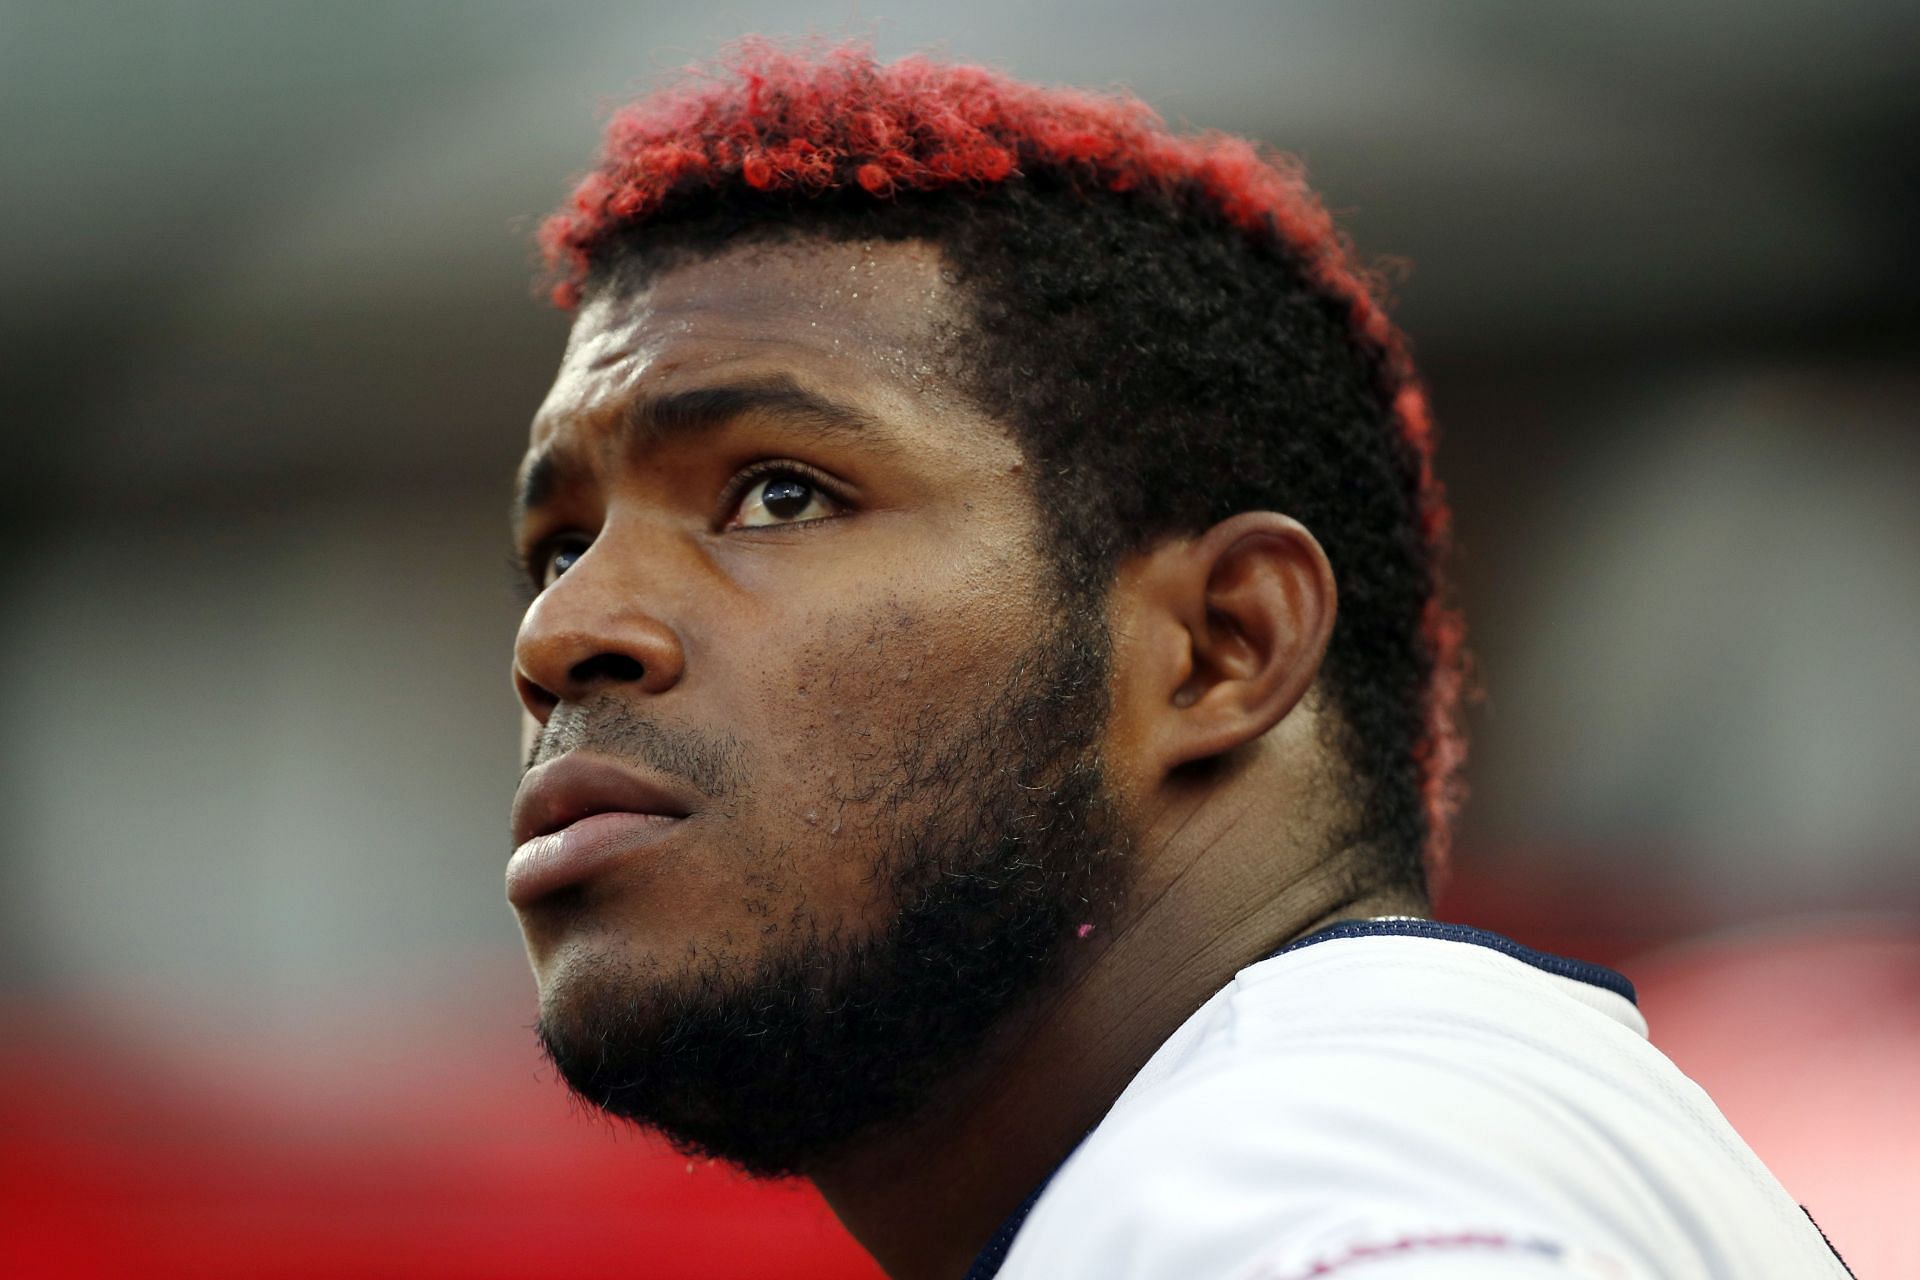 Cleveland Indians right fielder Yasiel Puig: “I don't know why